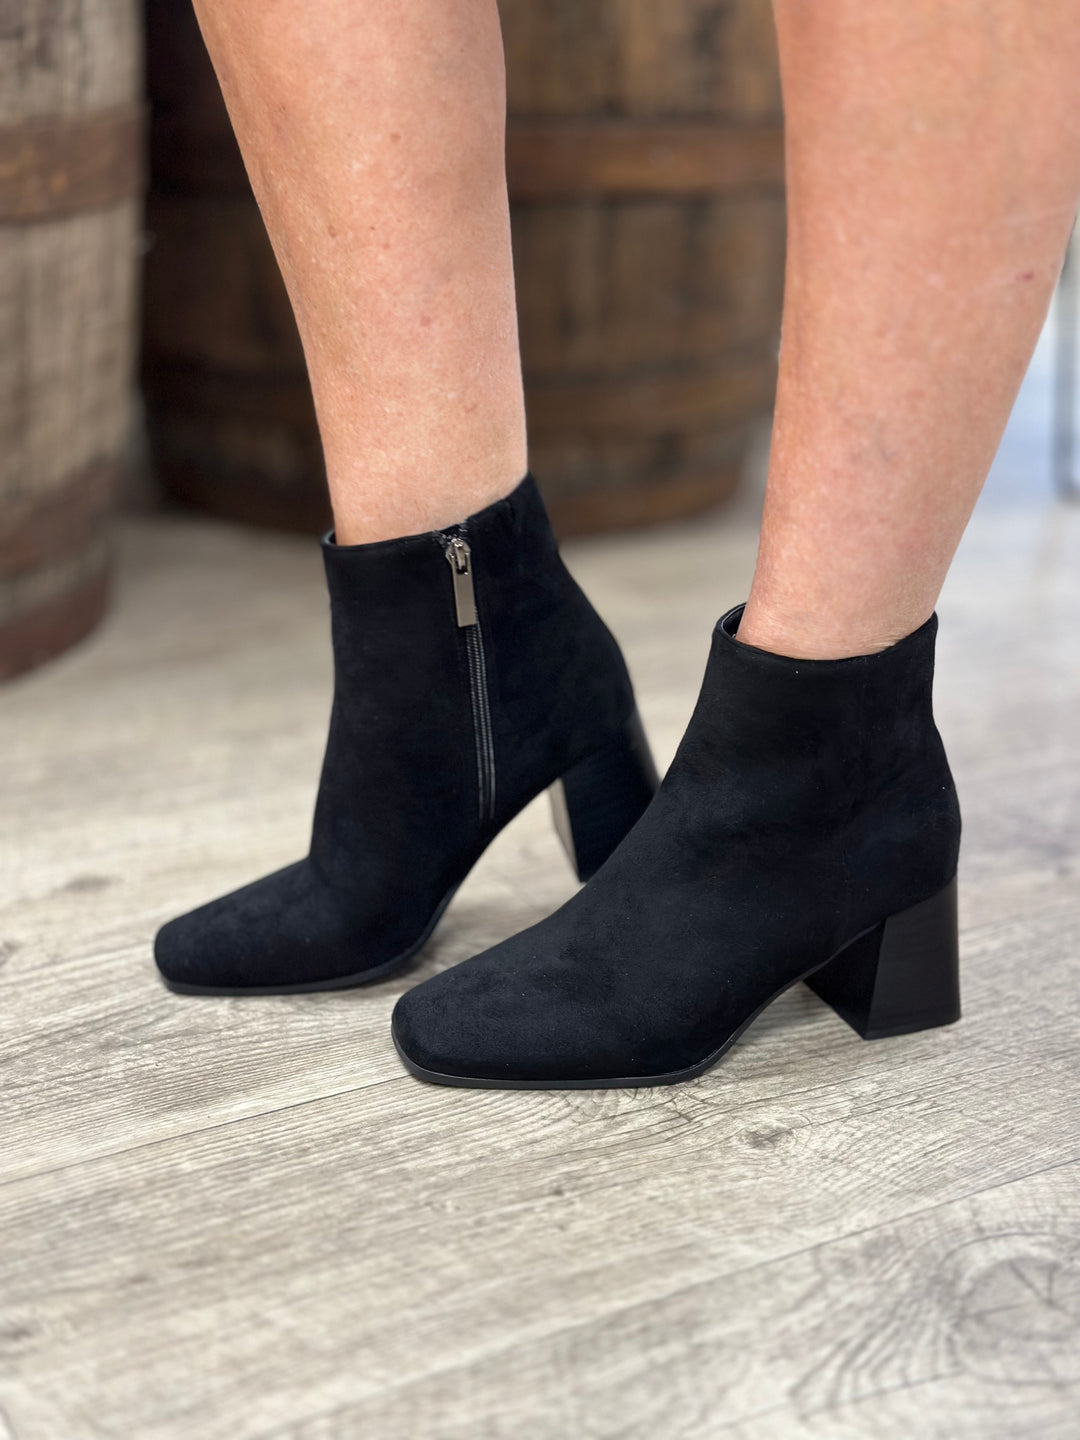 Corkys Felicia Black Suede Boot-Boots-Corkys-Evergreen Boutique, Women’s Fashion Boutique in Santa Claus, Indiana